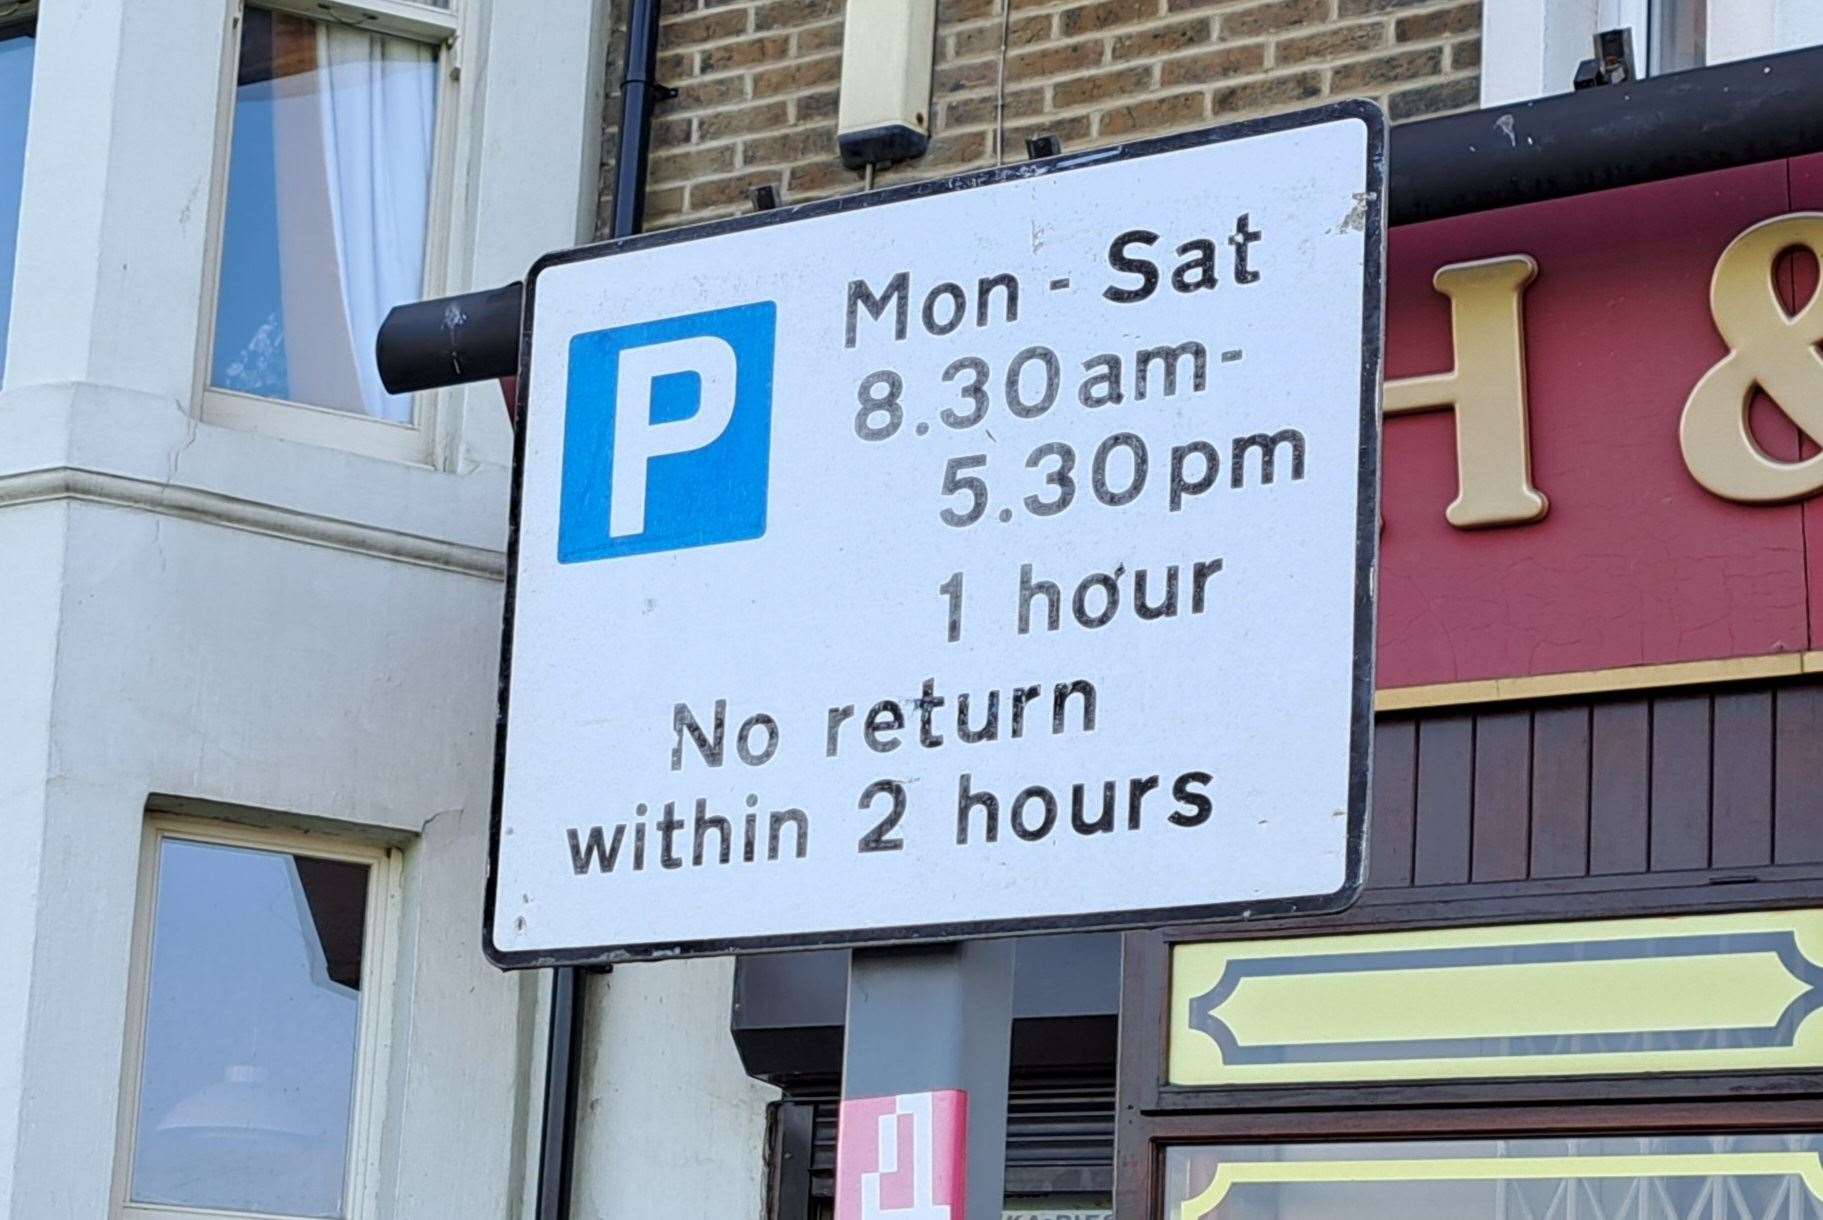 Shoppers and visitors are only supposed to park for one hour near the shops